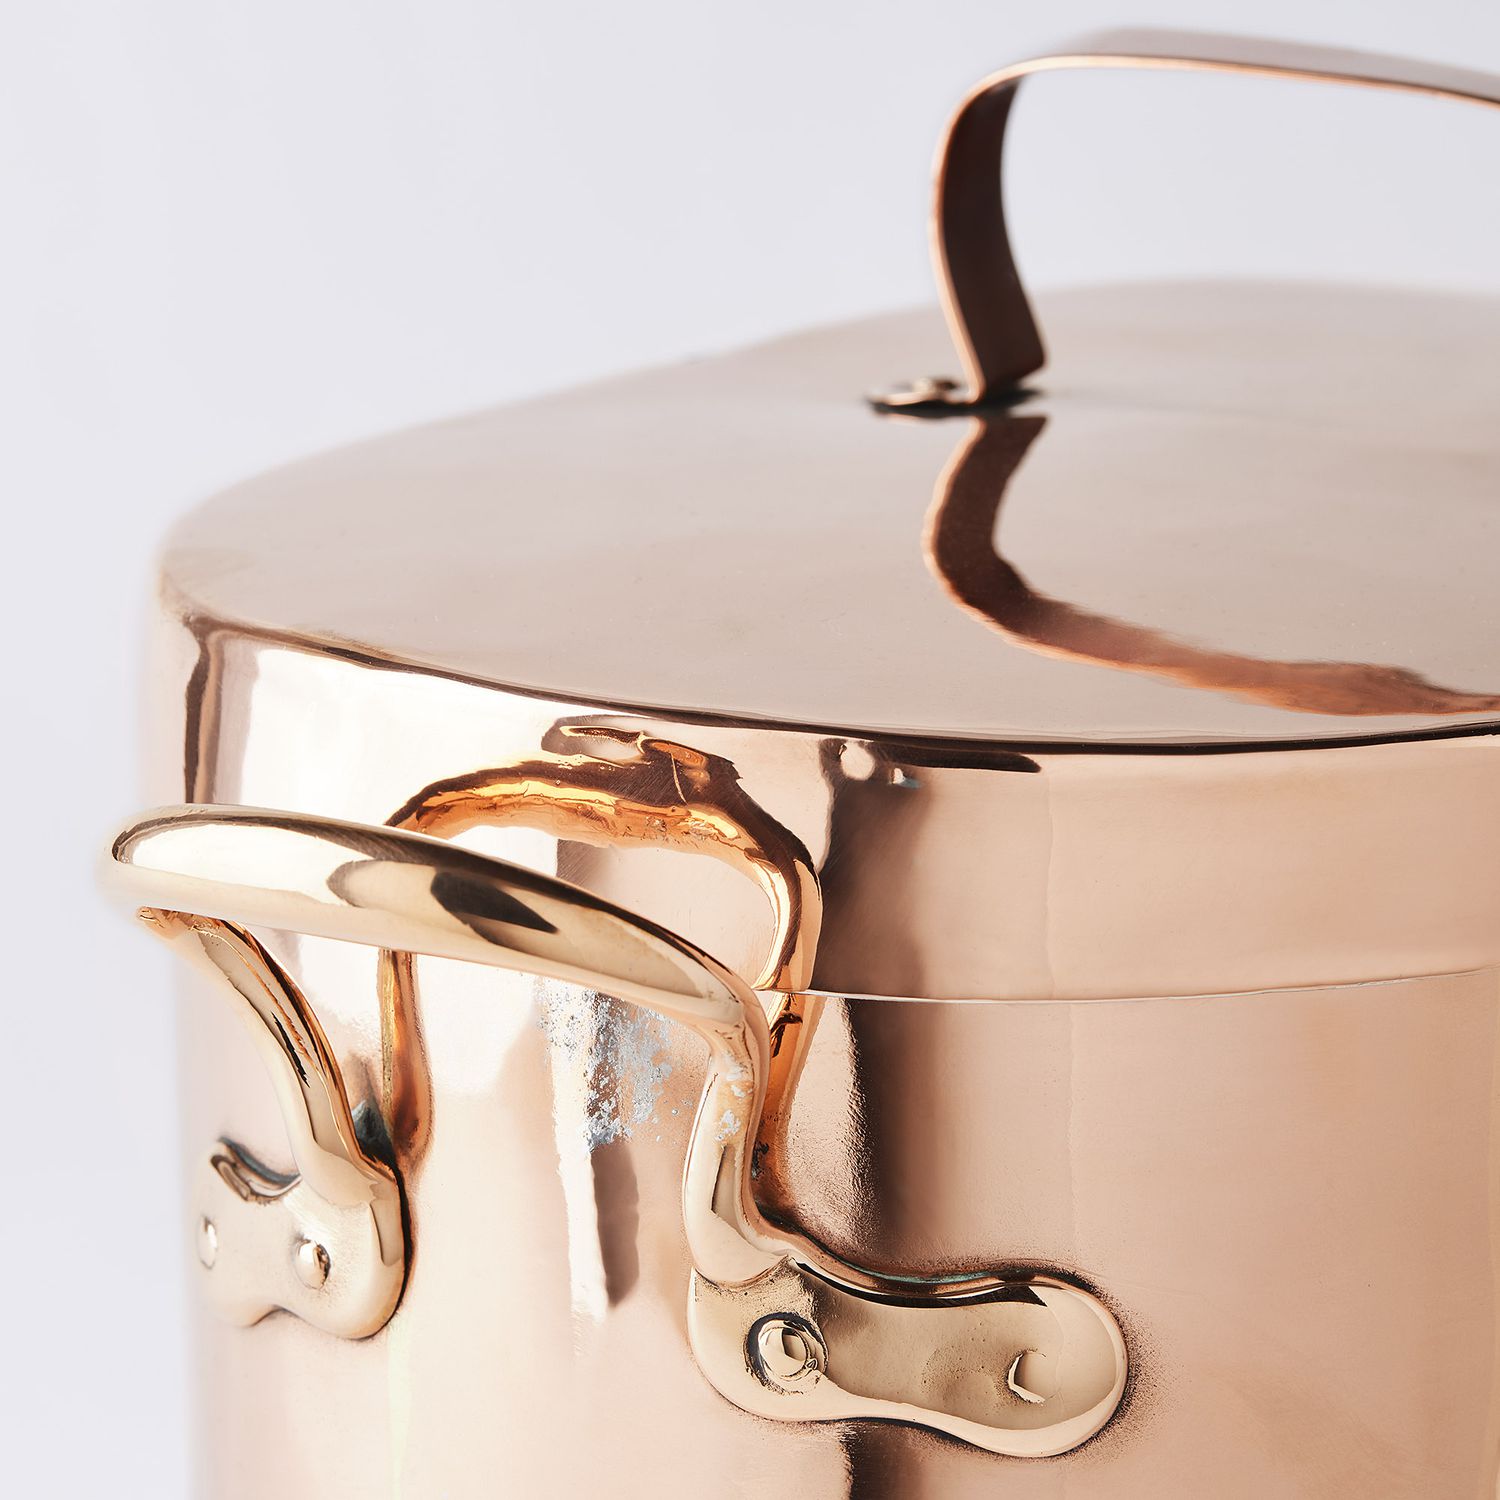 Coppermill Kitchen Vintage Copper Saucepan, 6-inch or 7-inch on Food52